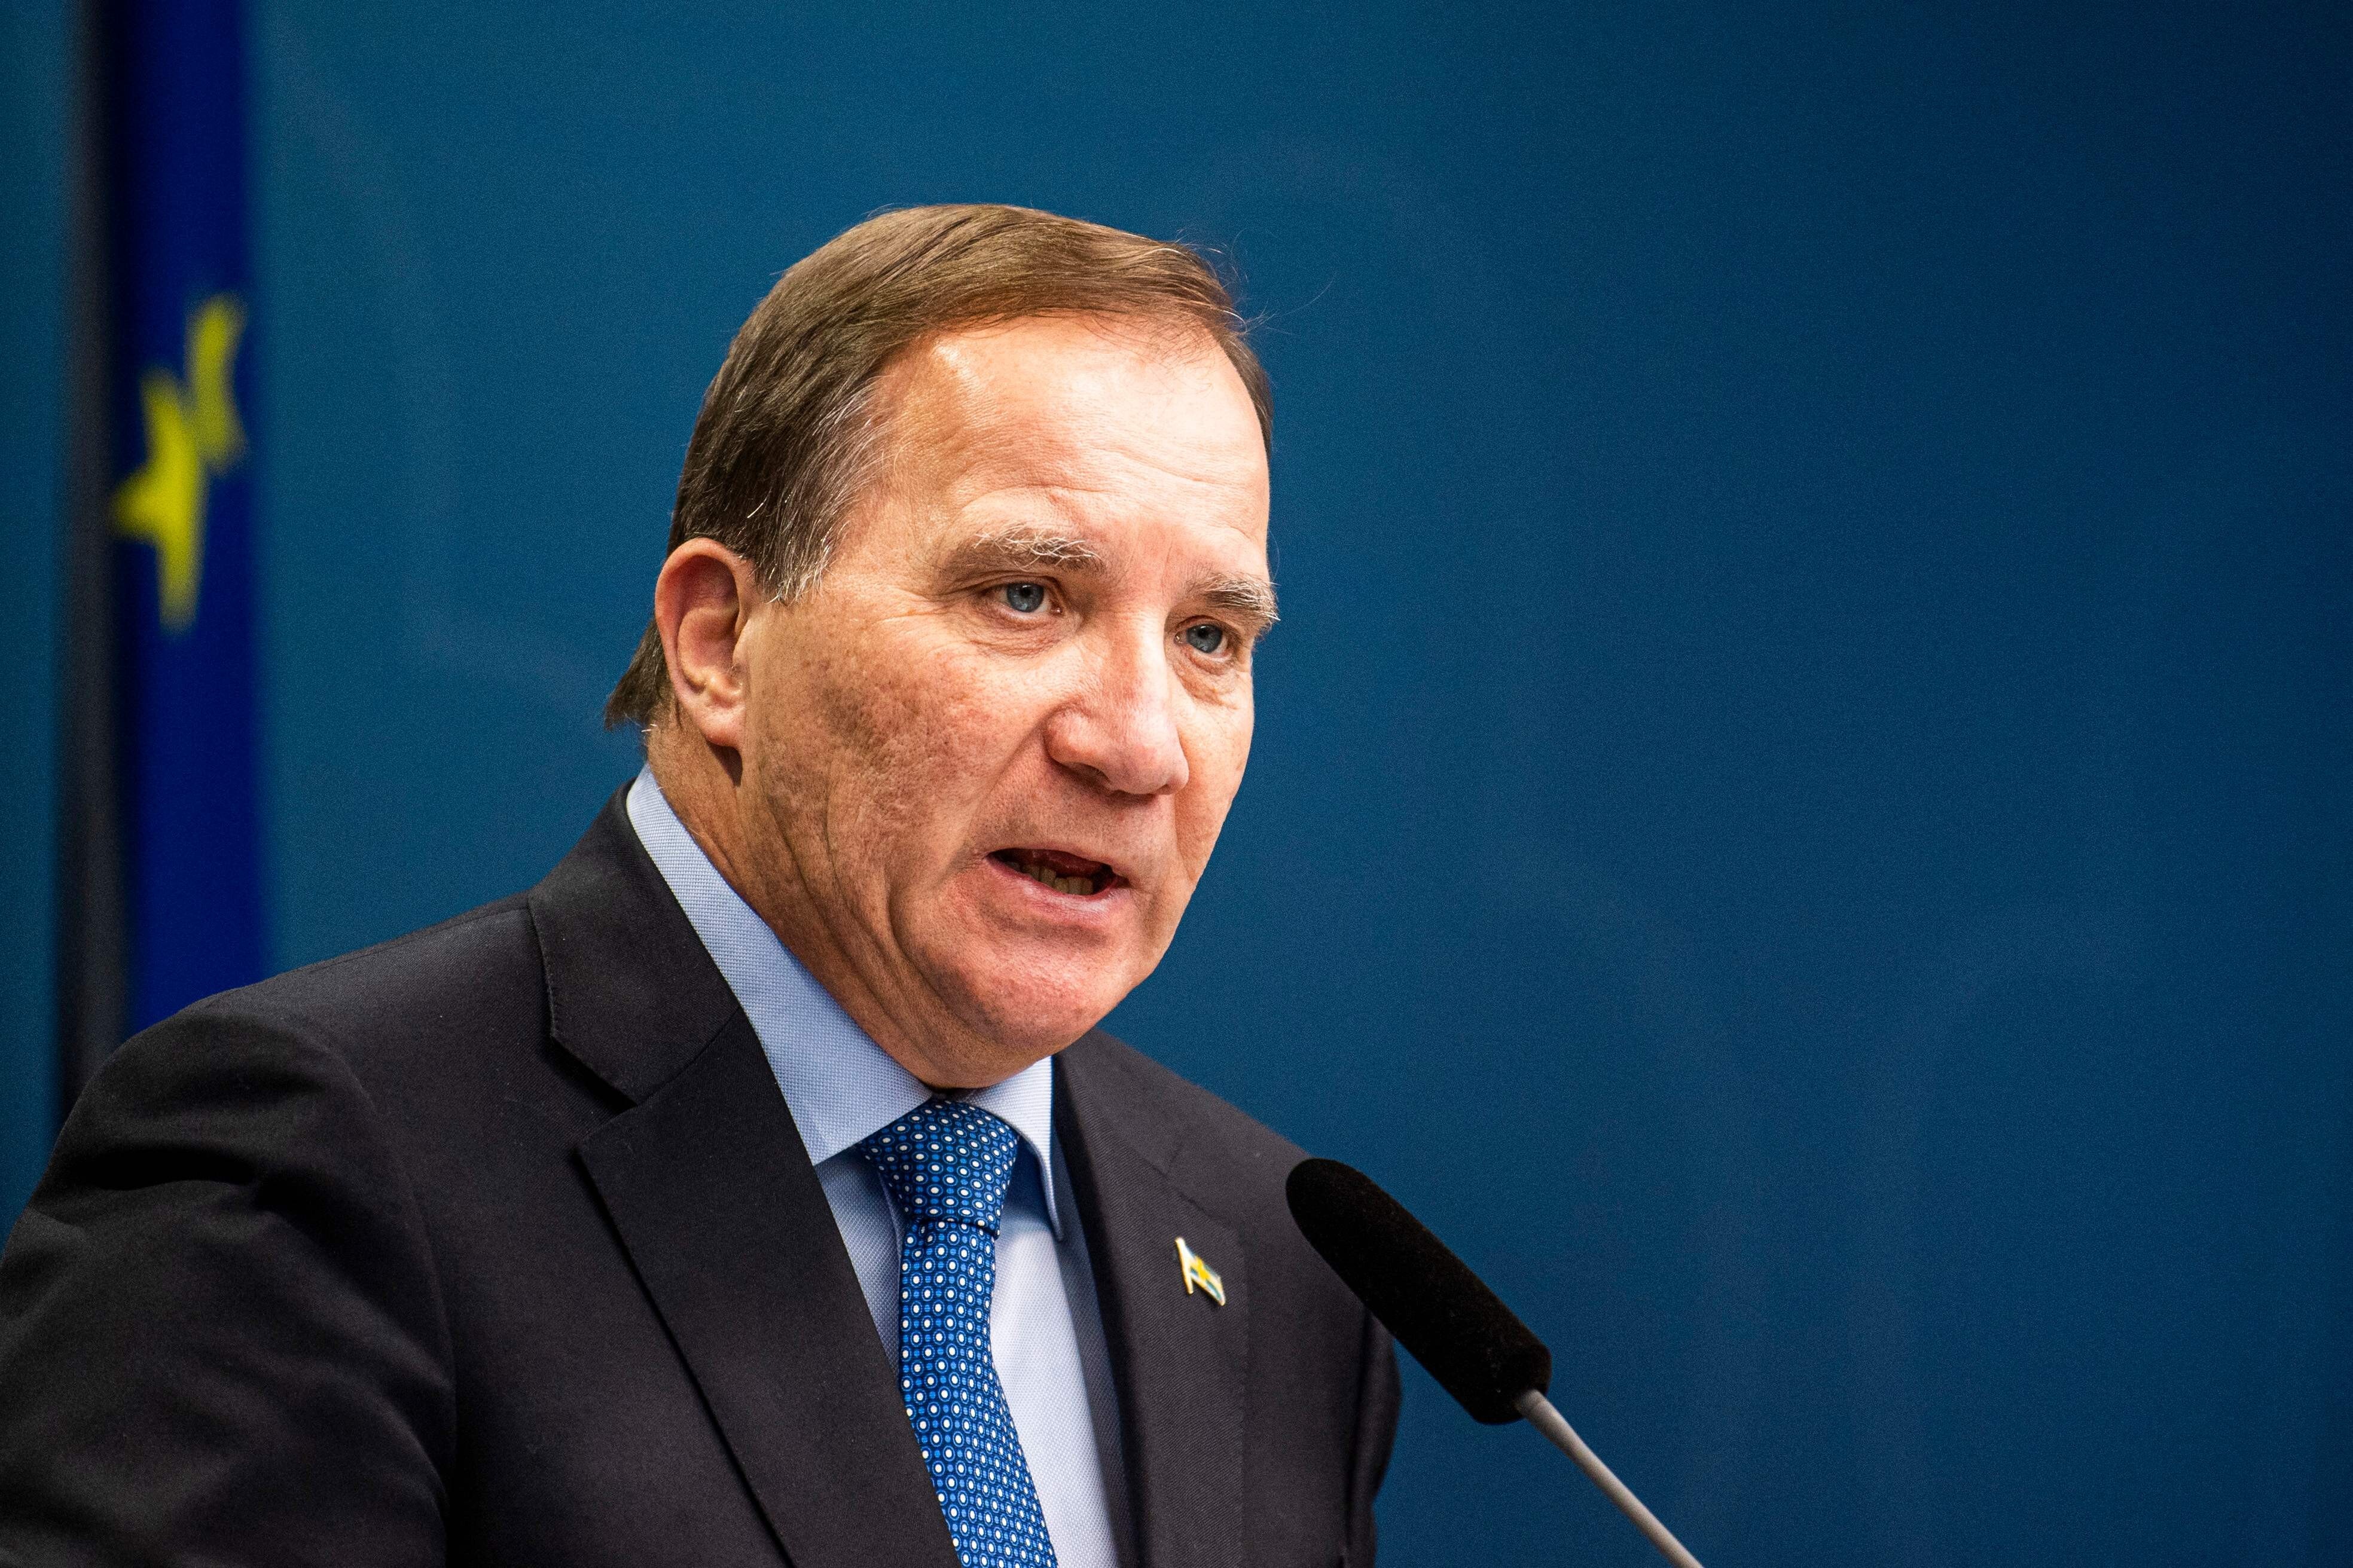 Following No Confidence Vote, Swedish PM Stefan Lofven Resigns From His Post